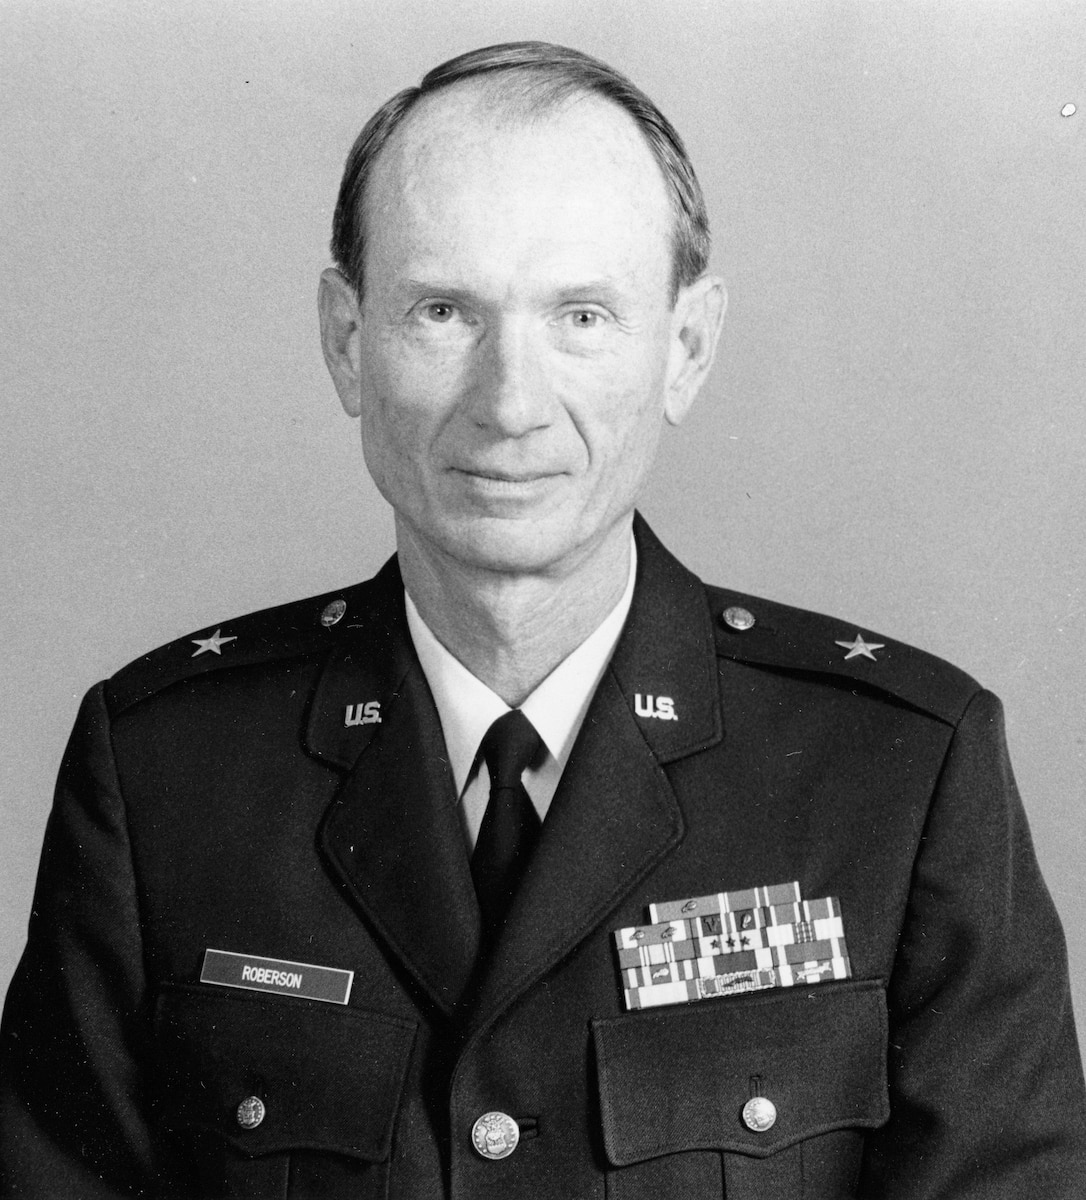 This is the official historical portrait of Brig. Gen. Paul L. Roberson.